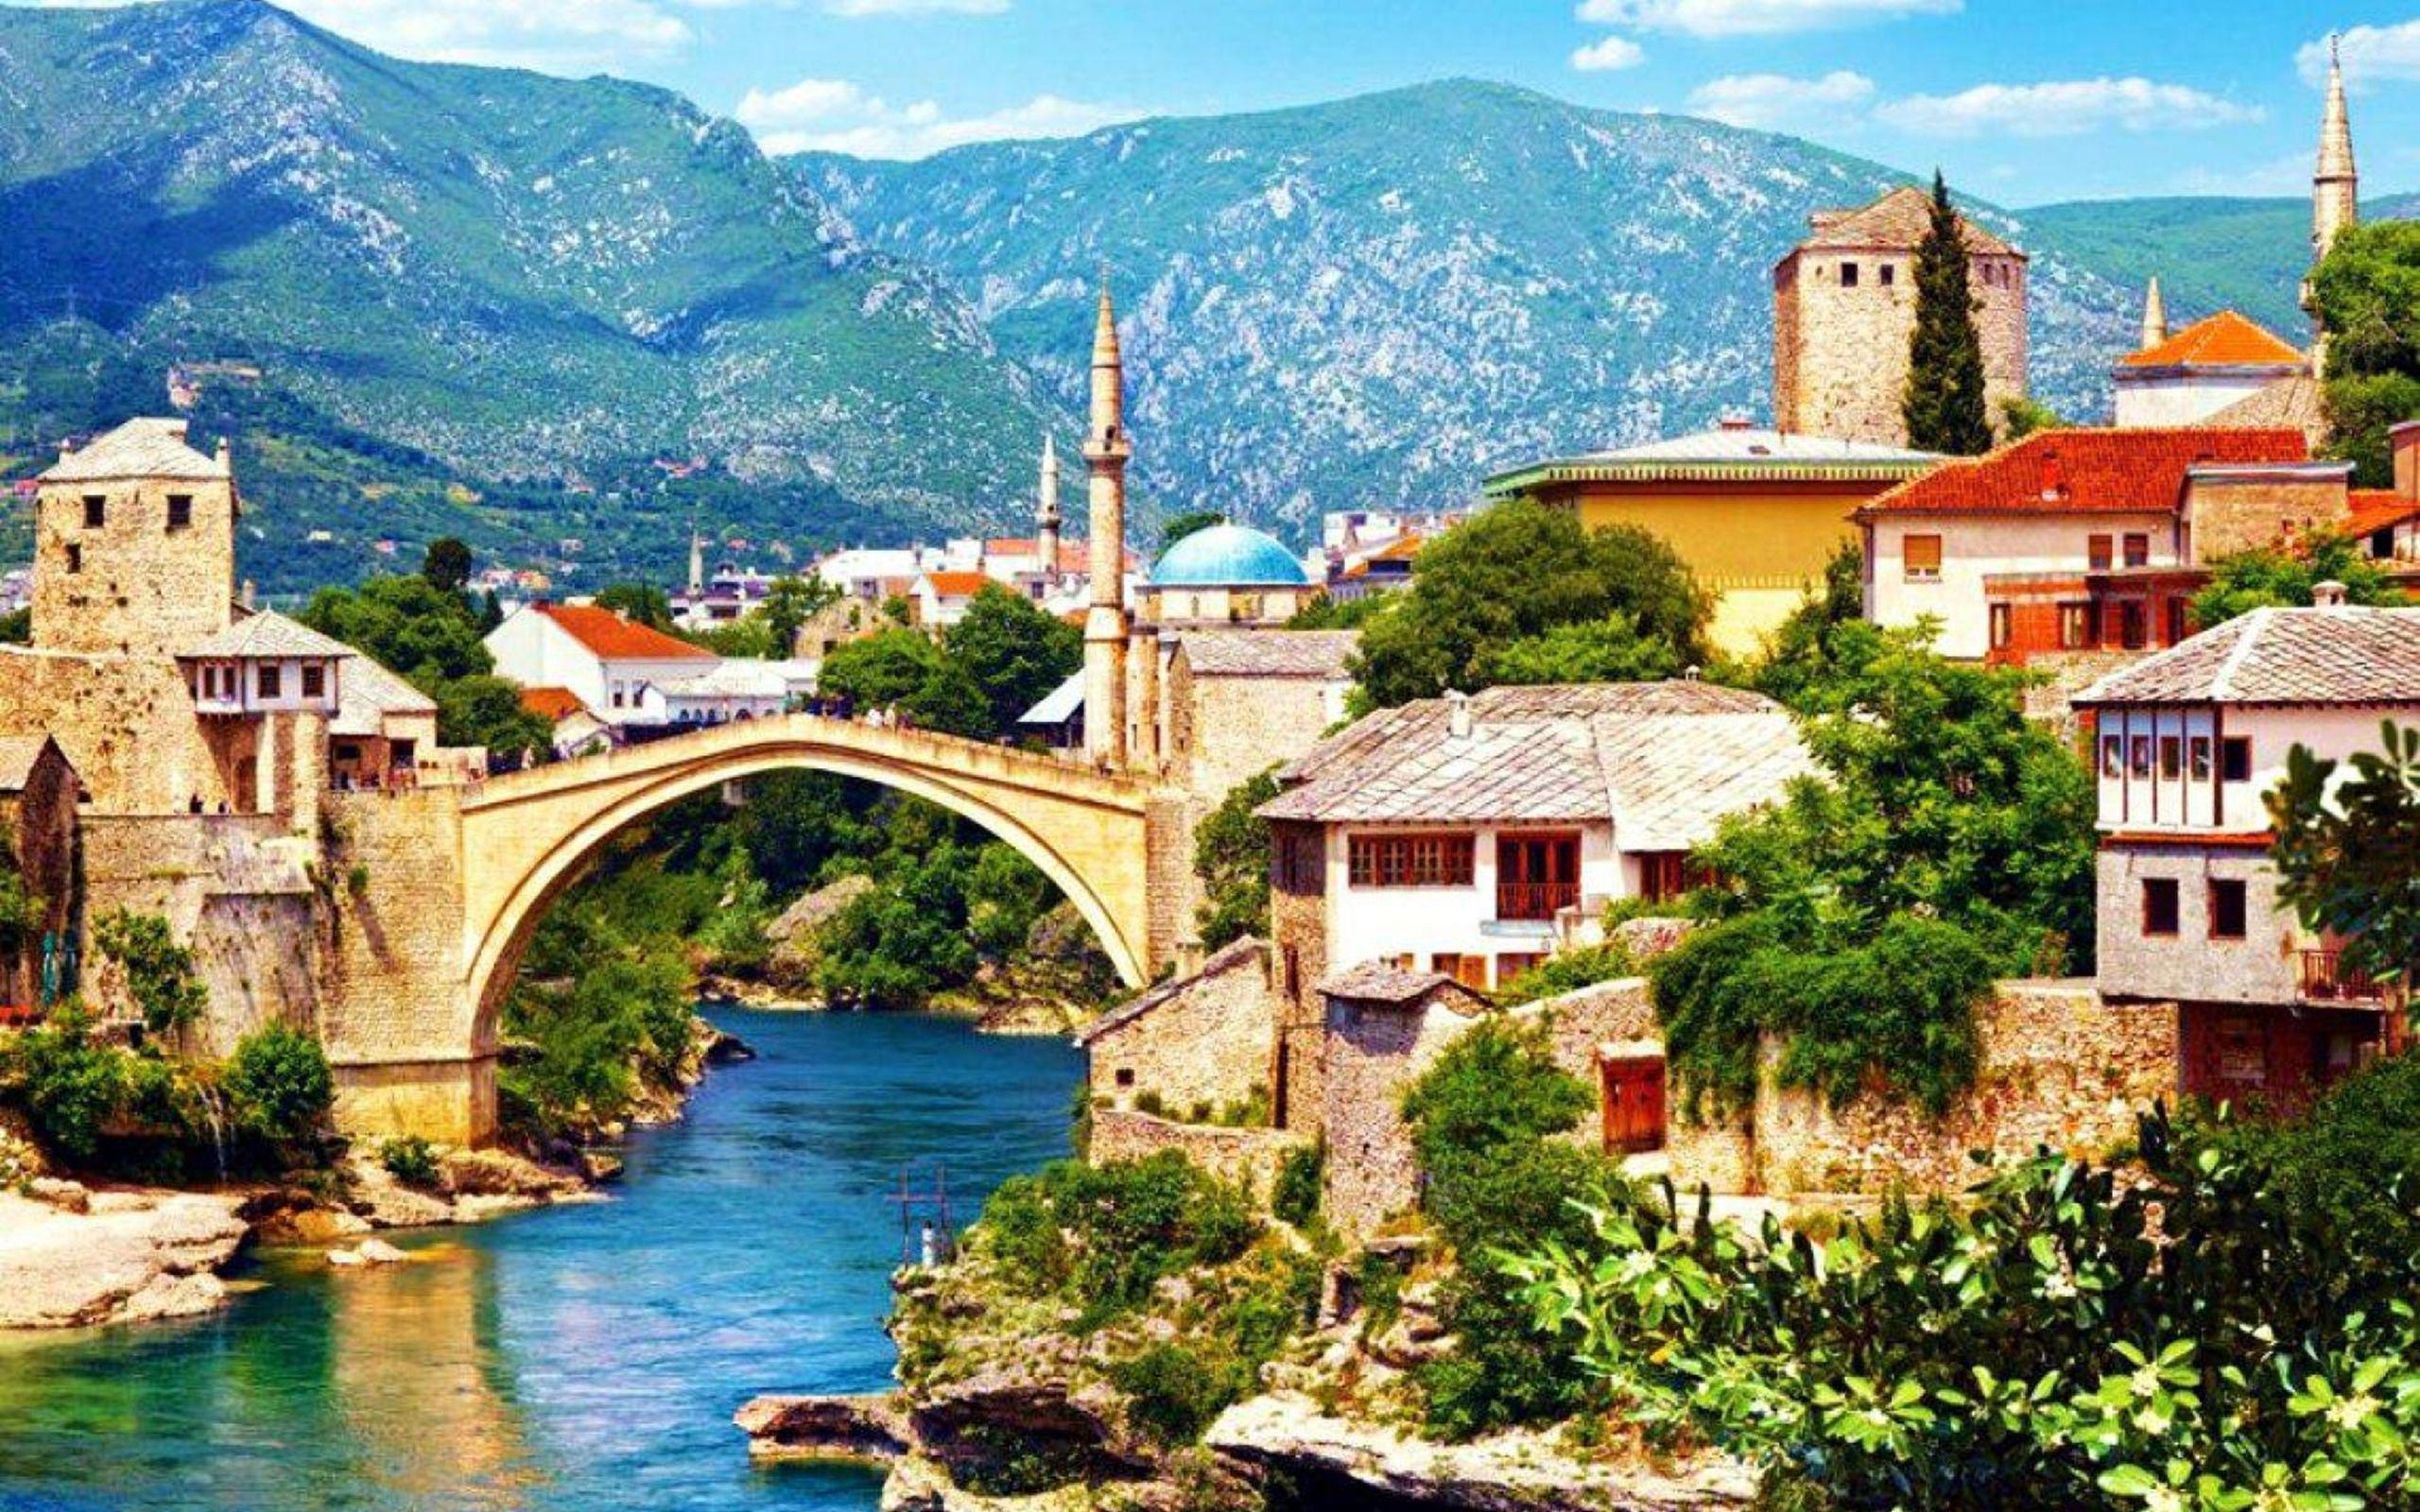 Old Town Mostar In Bosnia And Herzegovina Old Stone Bridge Over